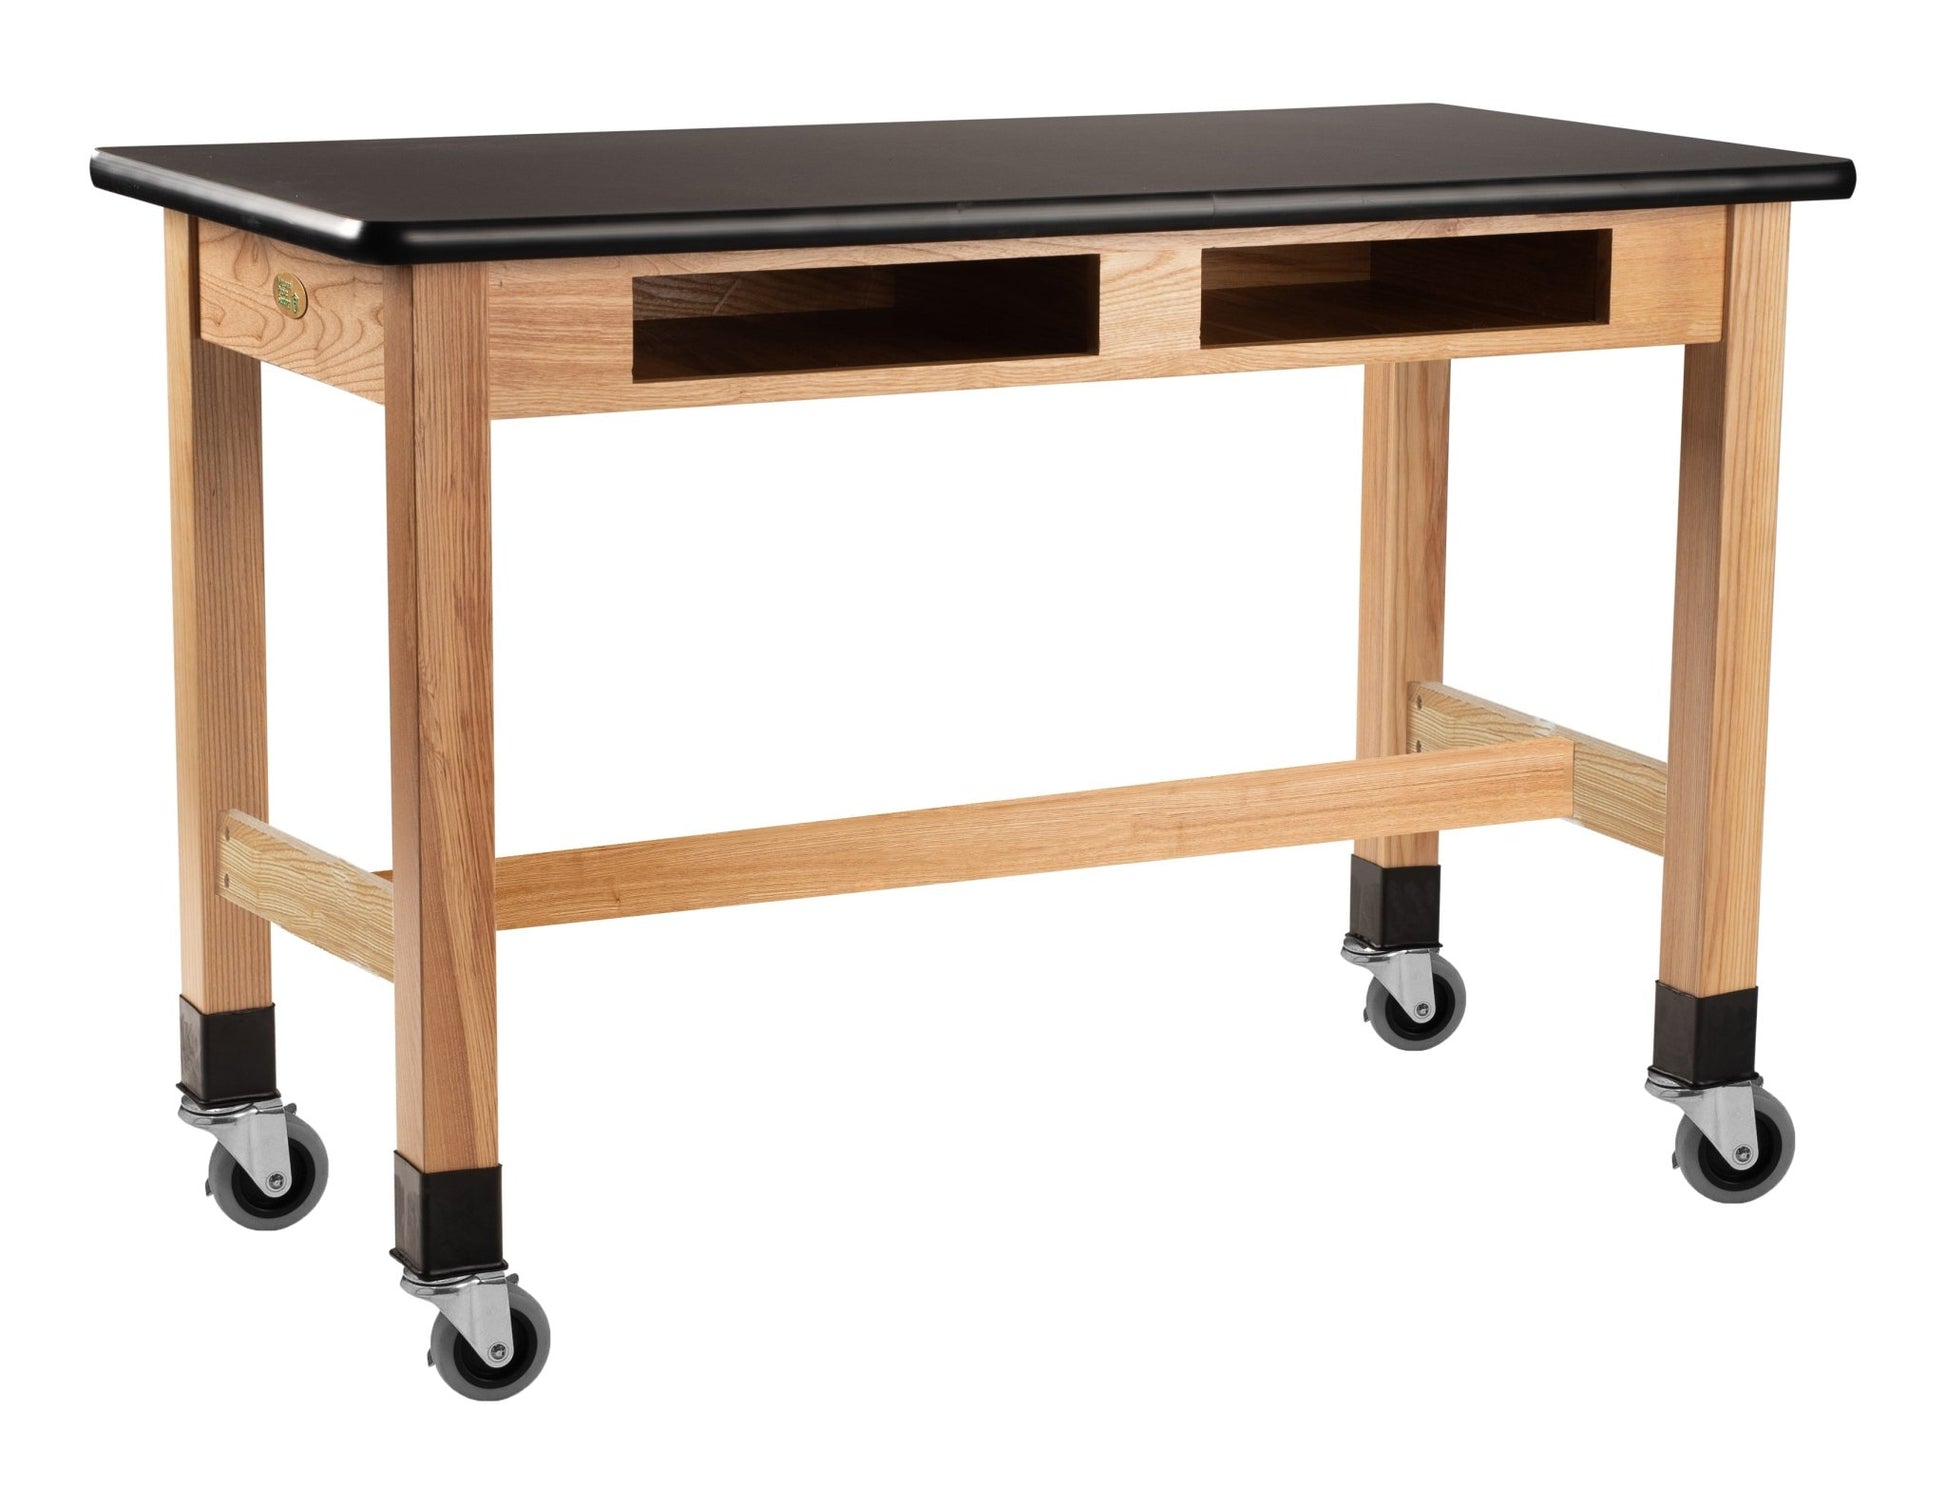 NPS Science Lab Table - High Pressure Laminate Top - w/ Book Compartment - 30"W x 72"D (National Public Seating NPS-SLT1-3072HB) - SchoolOutlet